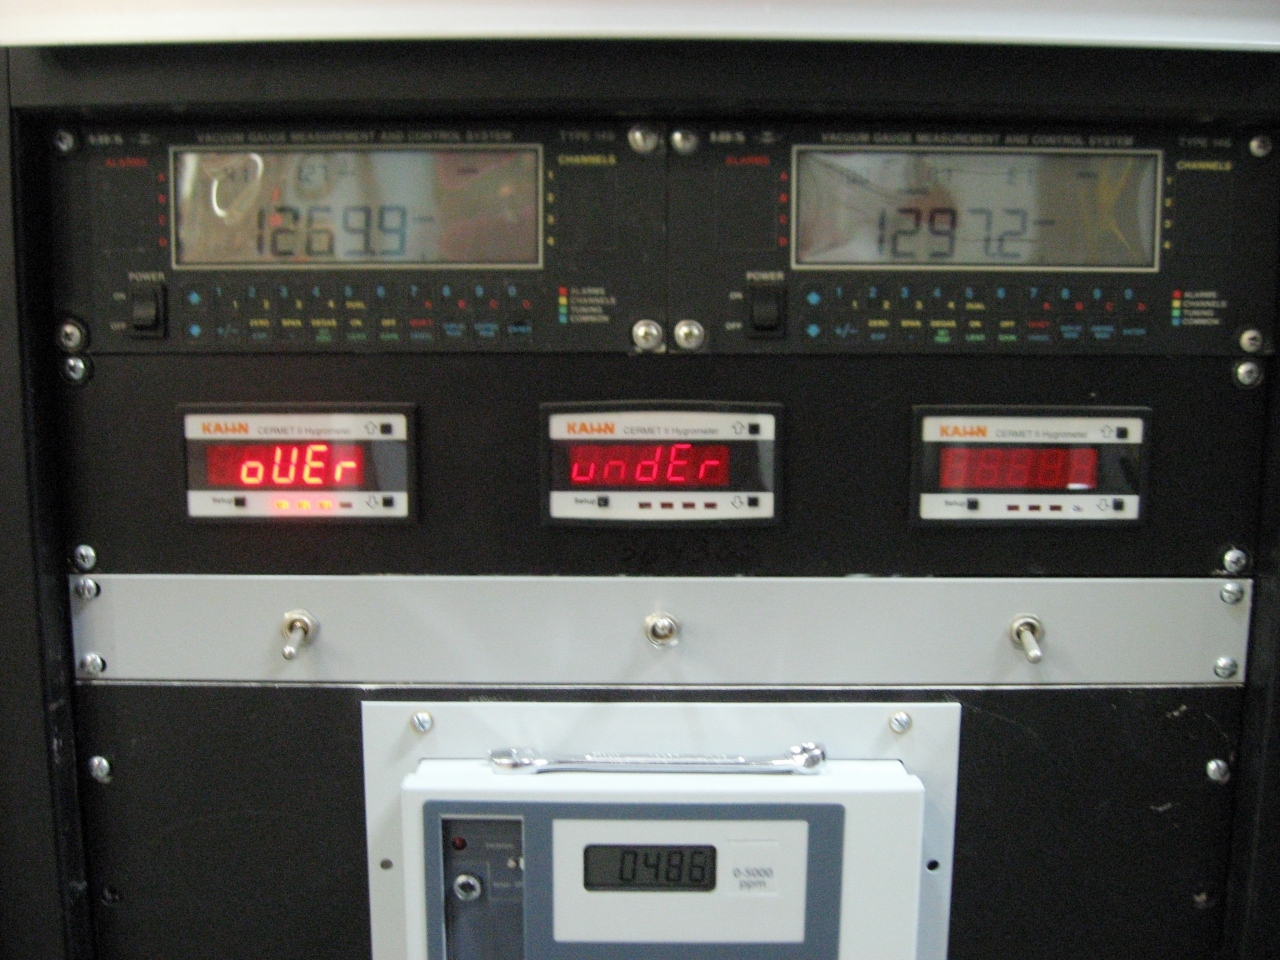 Vacuum gauge measurement and control system in the DC Field wing test cell corridor.